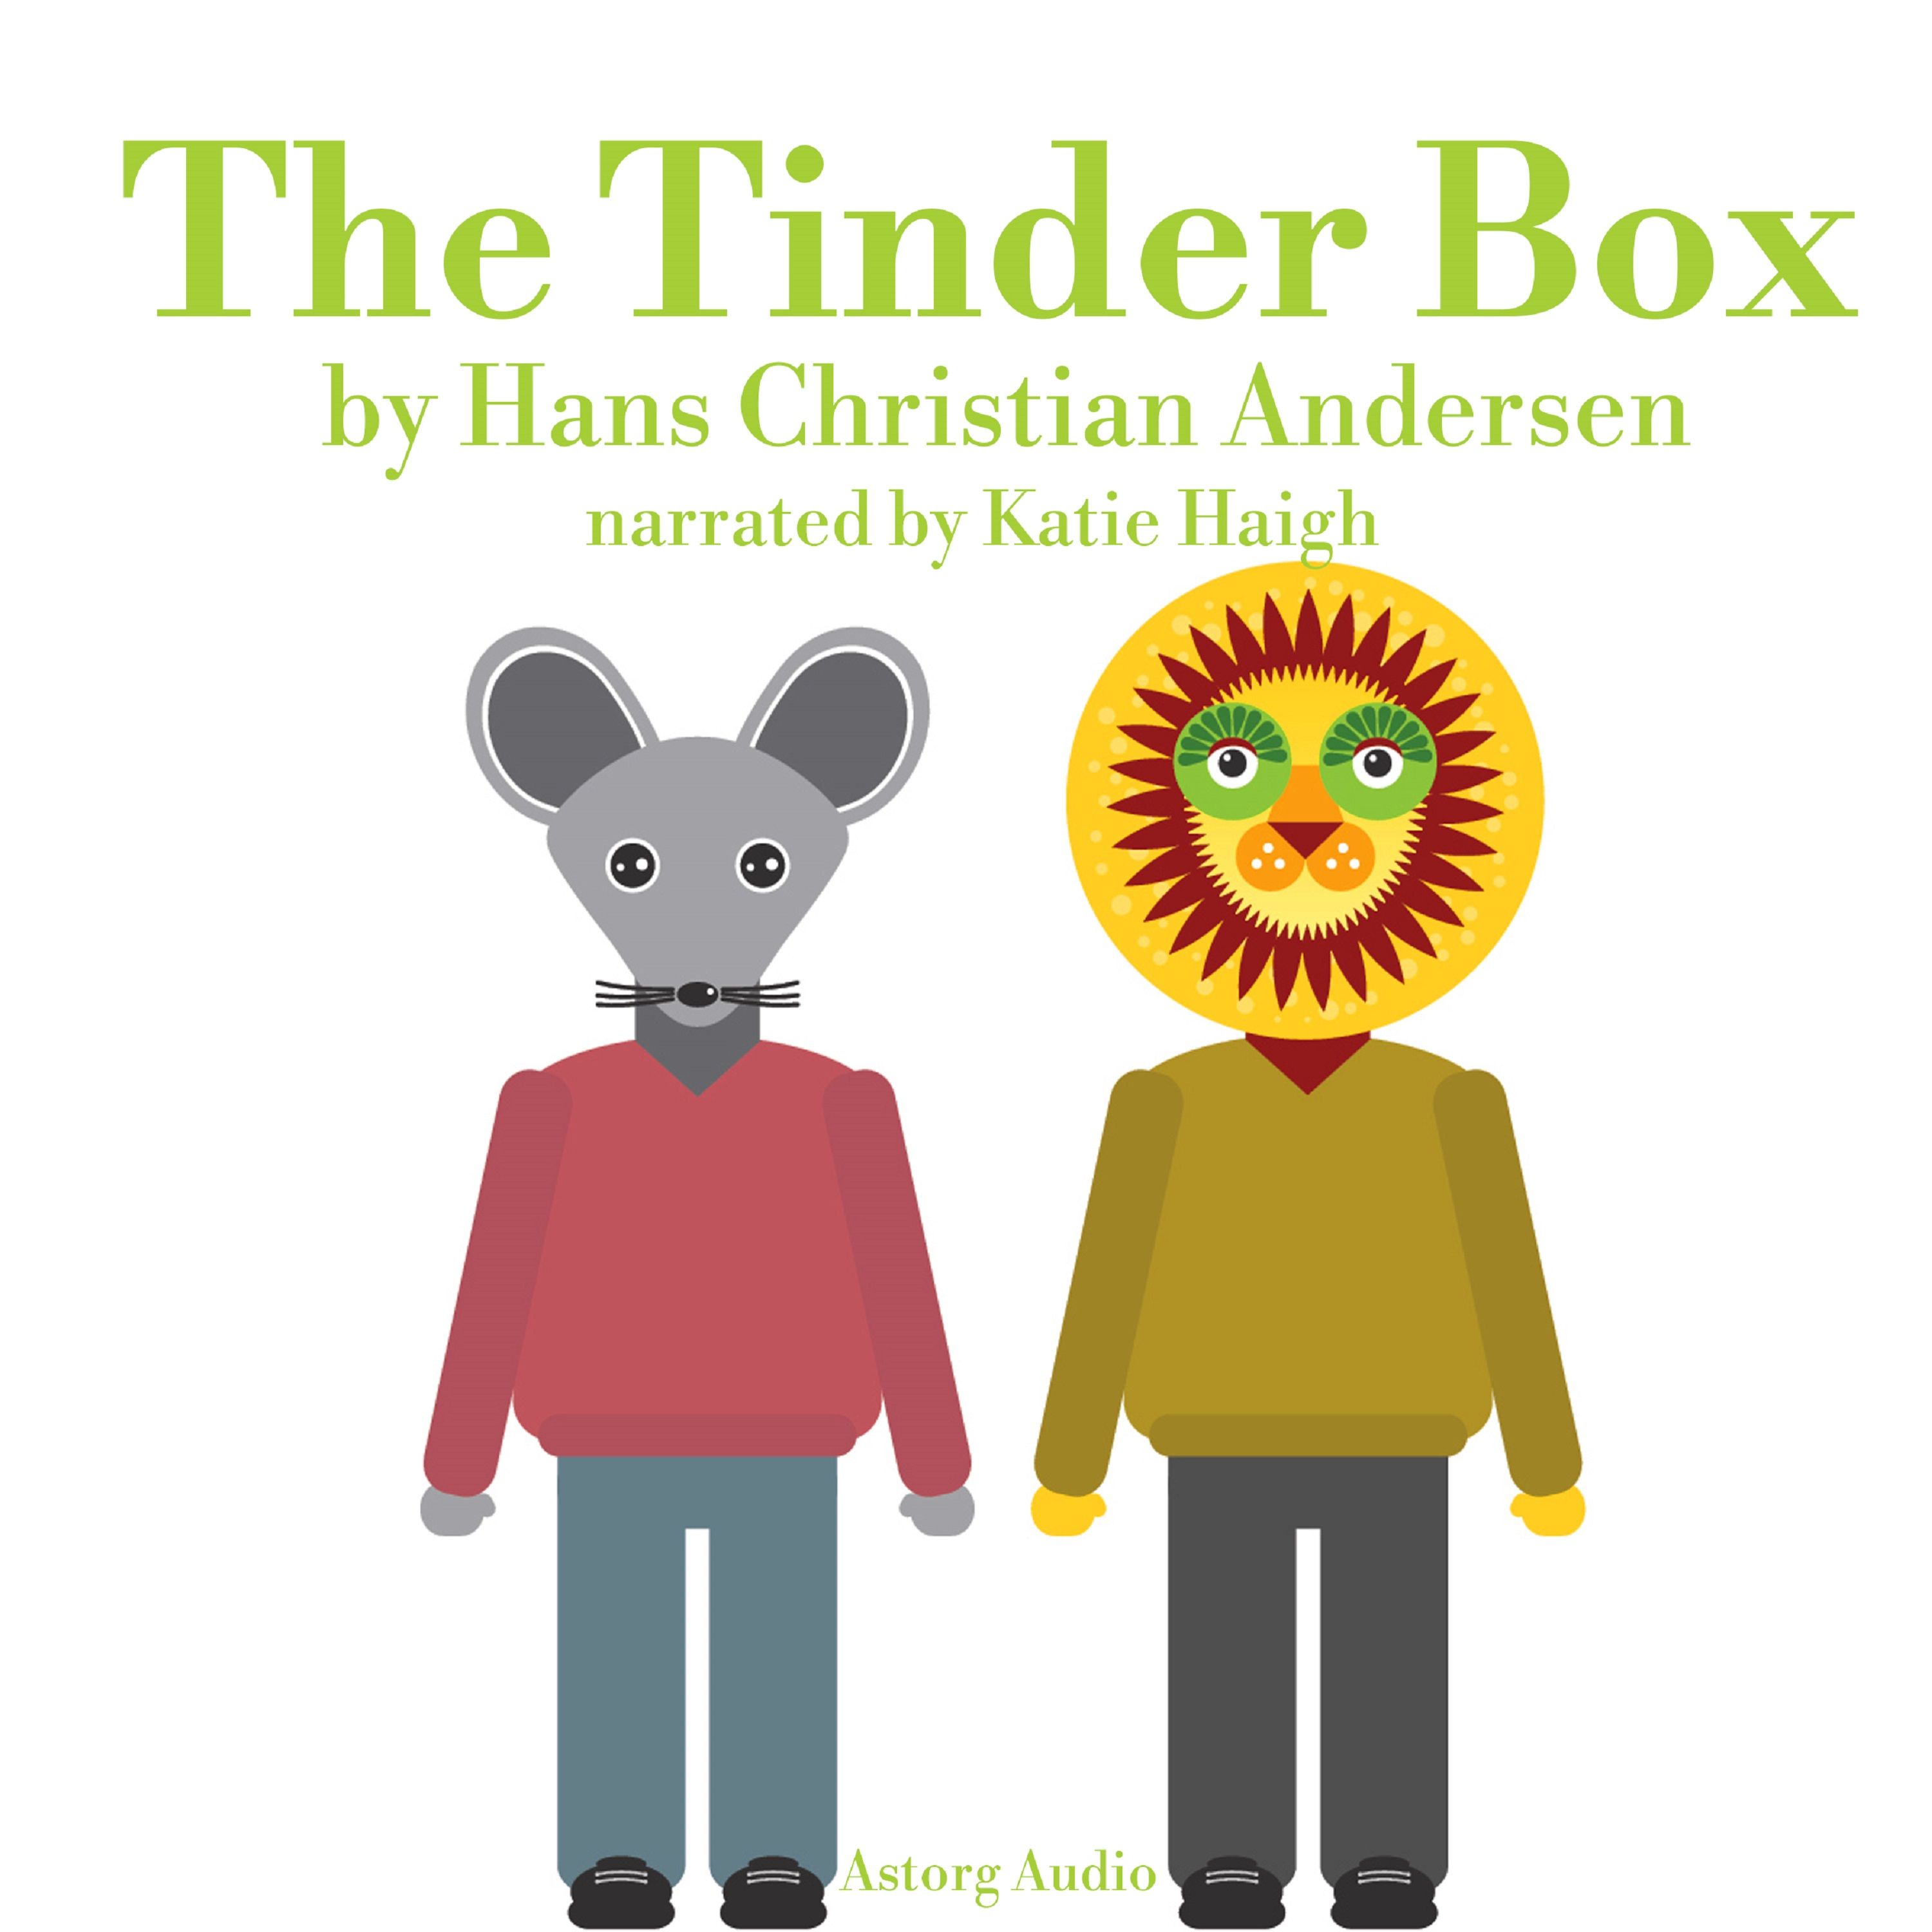 The Tinder Box, a Fairy Tale for Kids, audiobook by Hans Christian Andersen